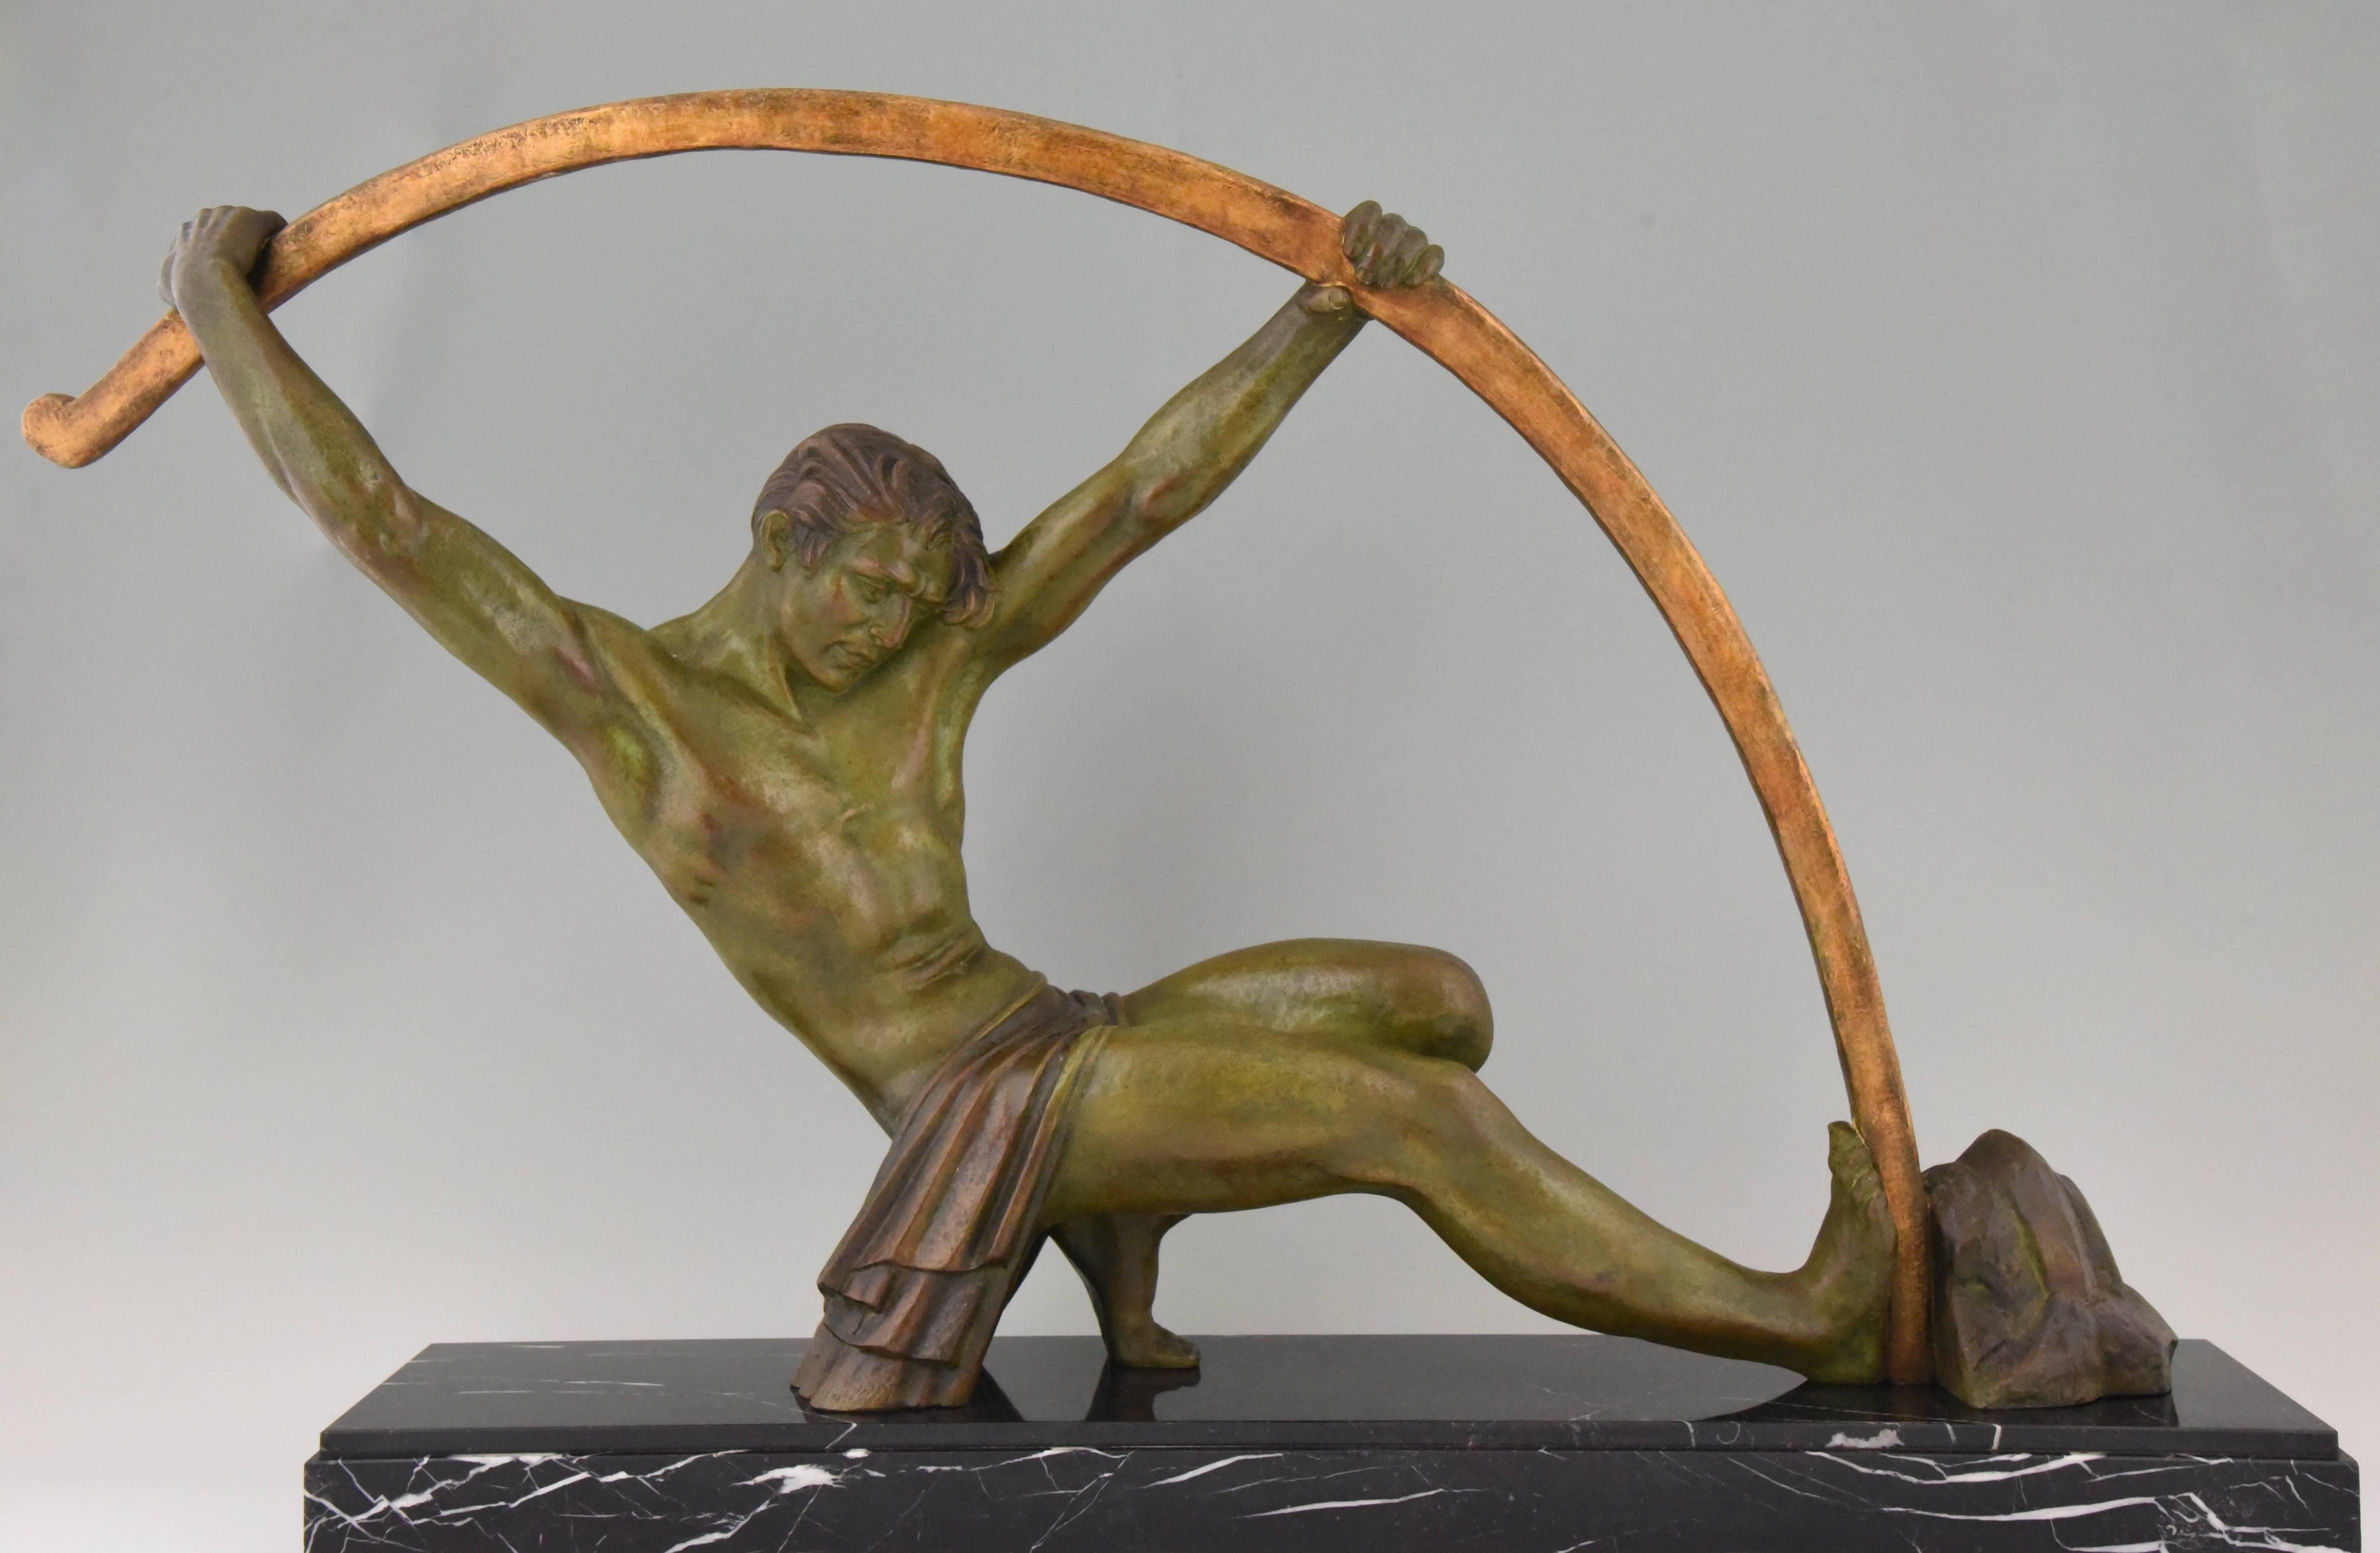 “L’age du bronze”
Powerful Art Deco sculpture of an athletic man bending a bar on a marble base by the famous sculptor Demetre H. Chiparus, 1930.
This model is illustrated in the book
“Chiparus -Master of Art Deco” by A. Shayo, on page 65.